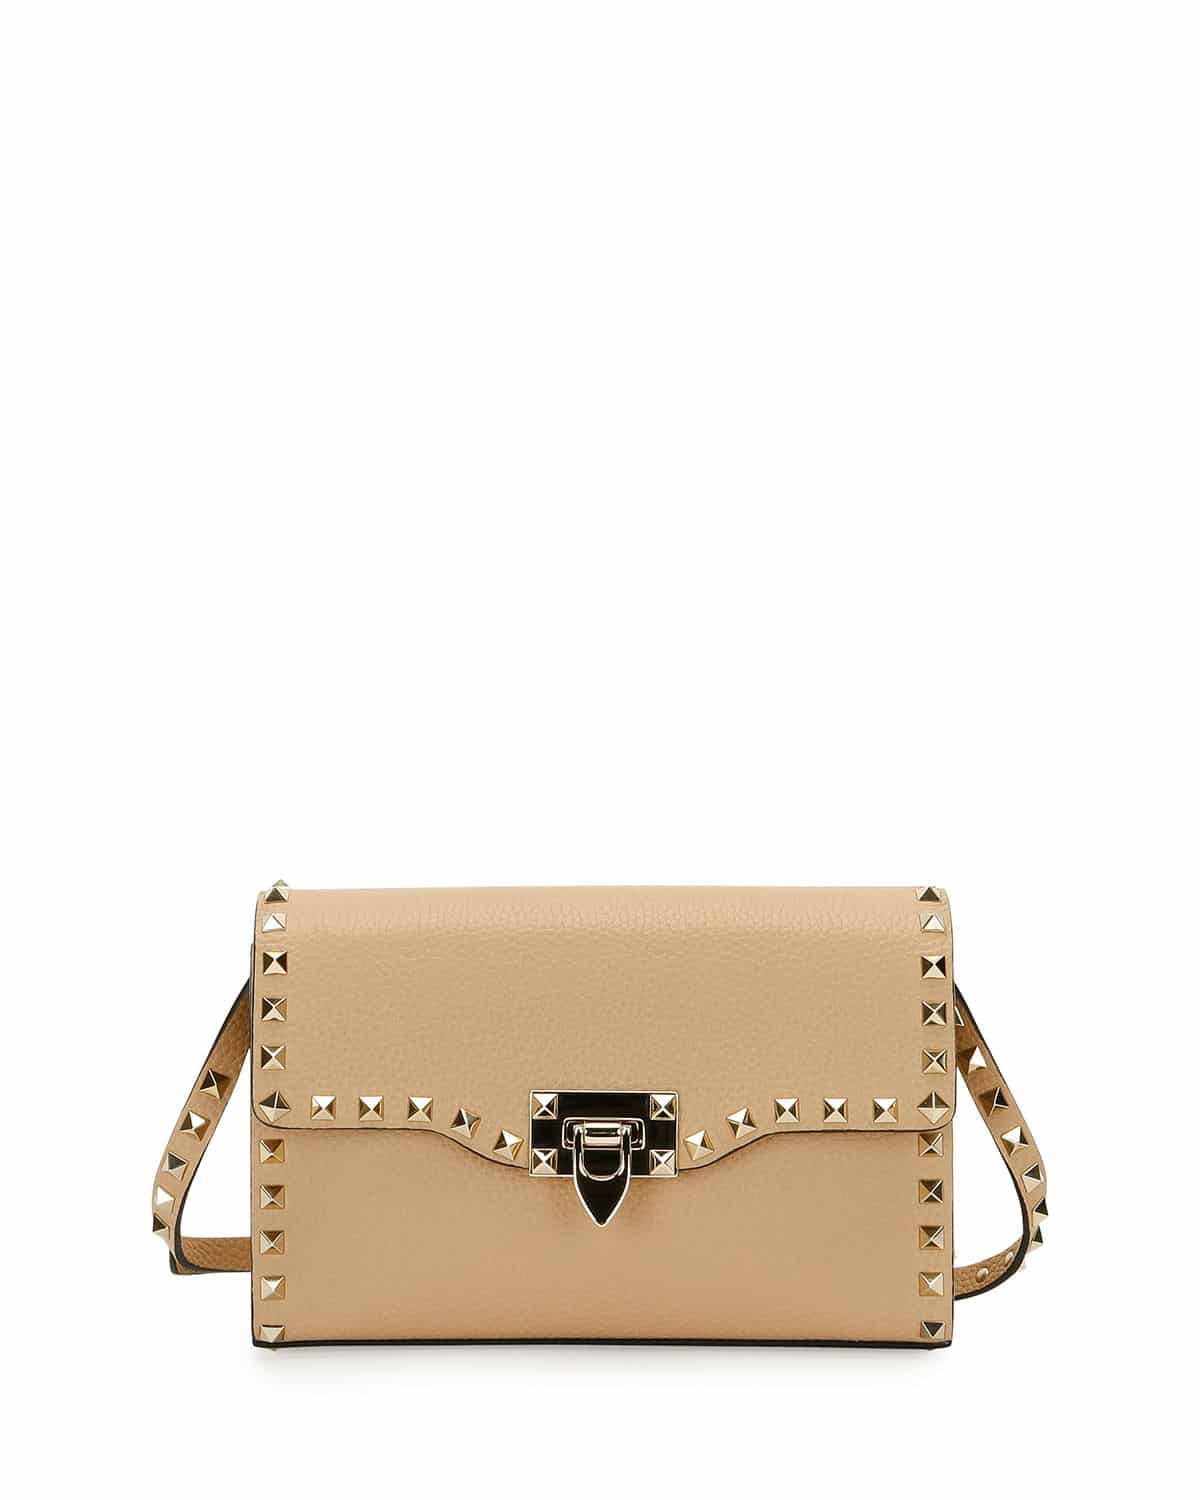 Valentino Spring/Summer 2017 Bag Collection - Spotted Fashion